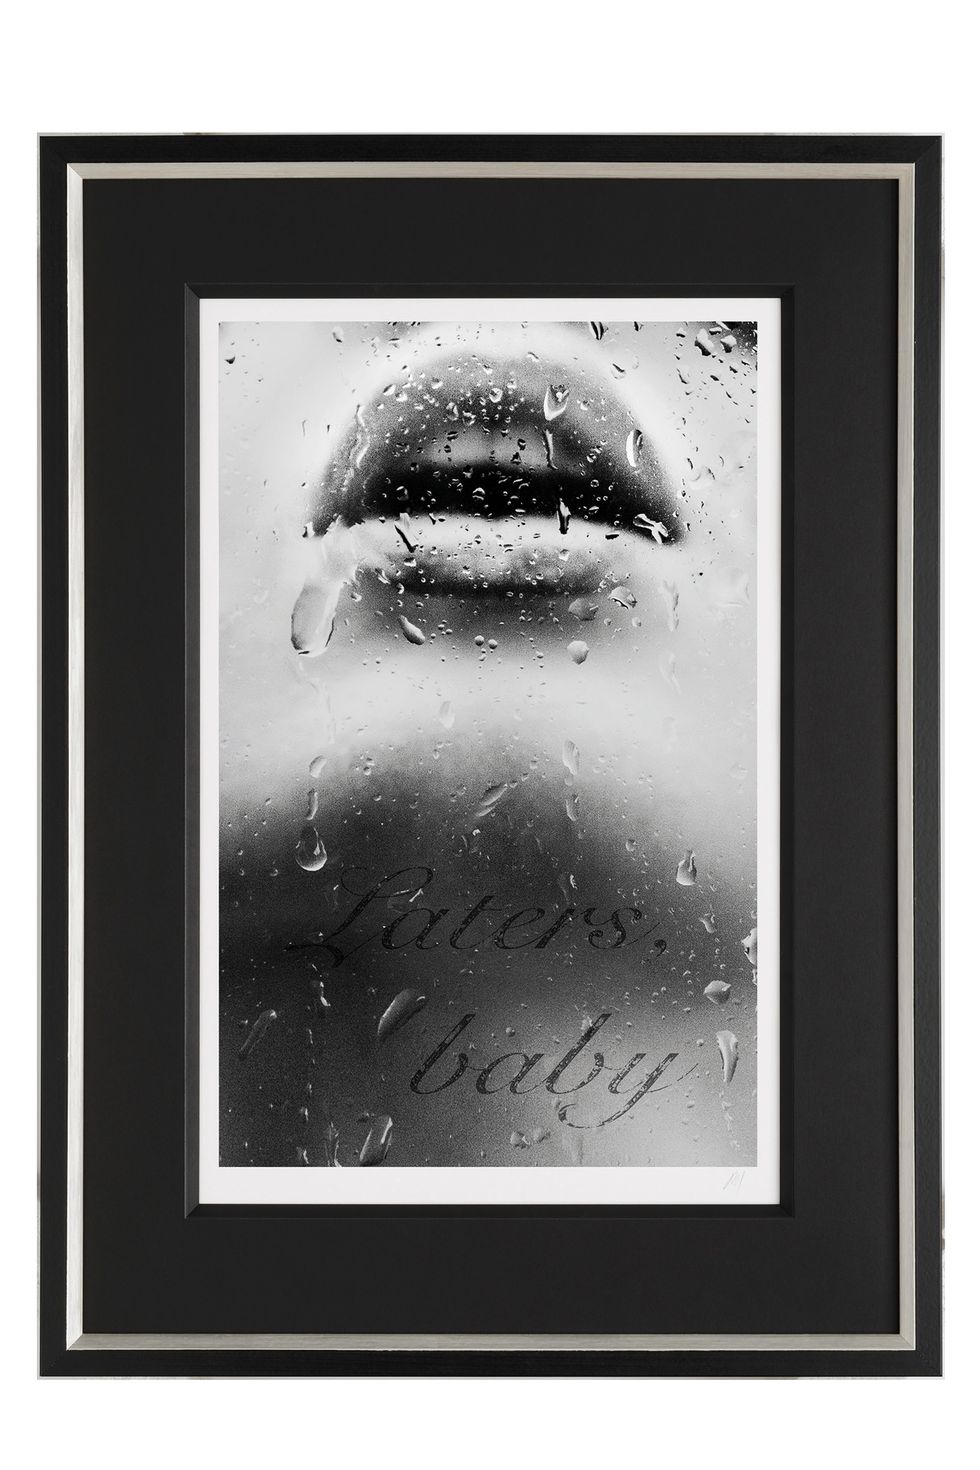 50 Shades of Grey art collection